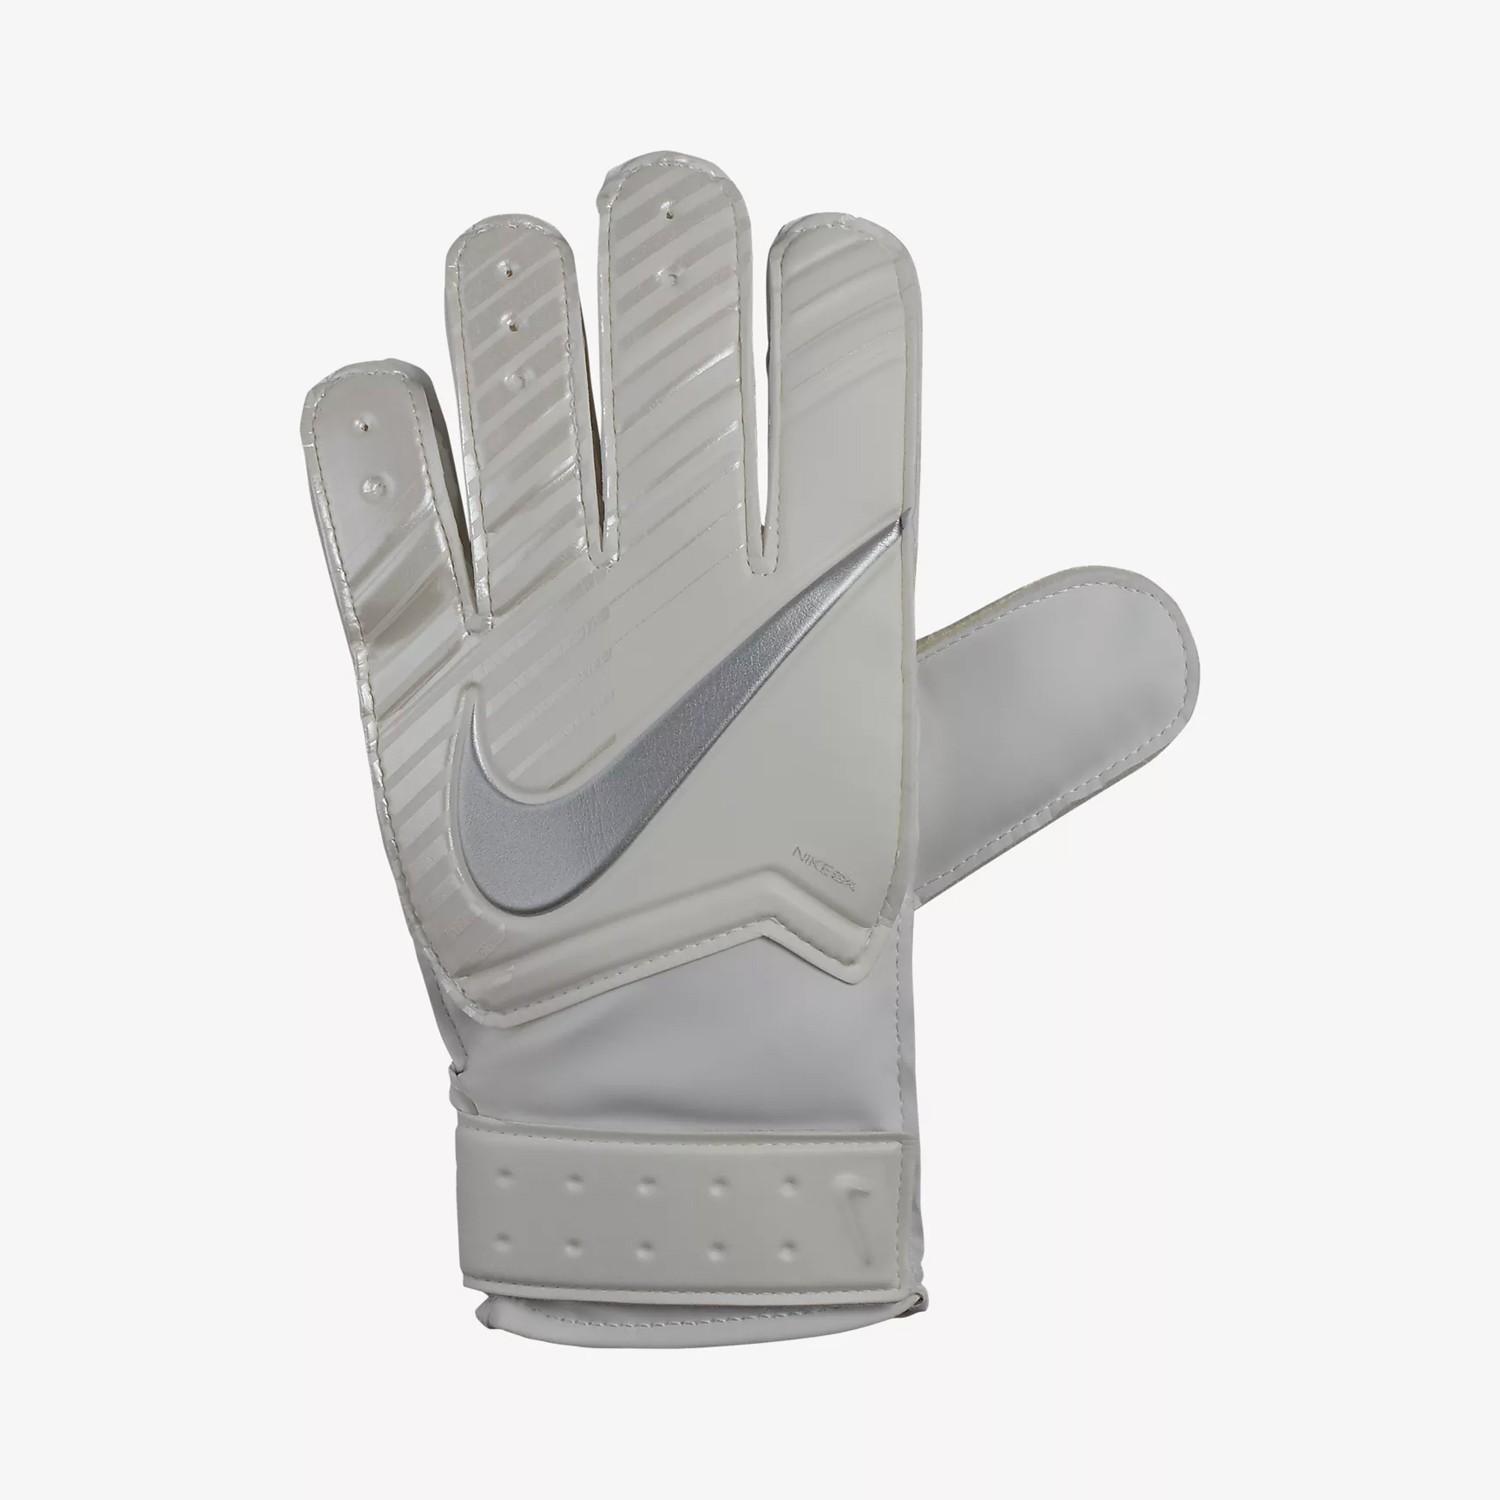 All White Nike Football Gloves - Images Gloves and Descriptions ...